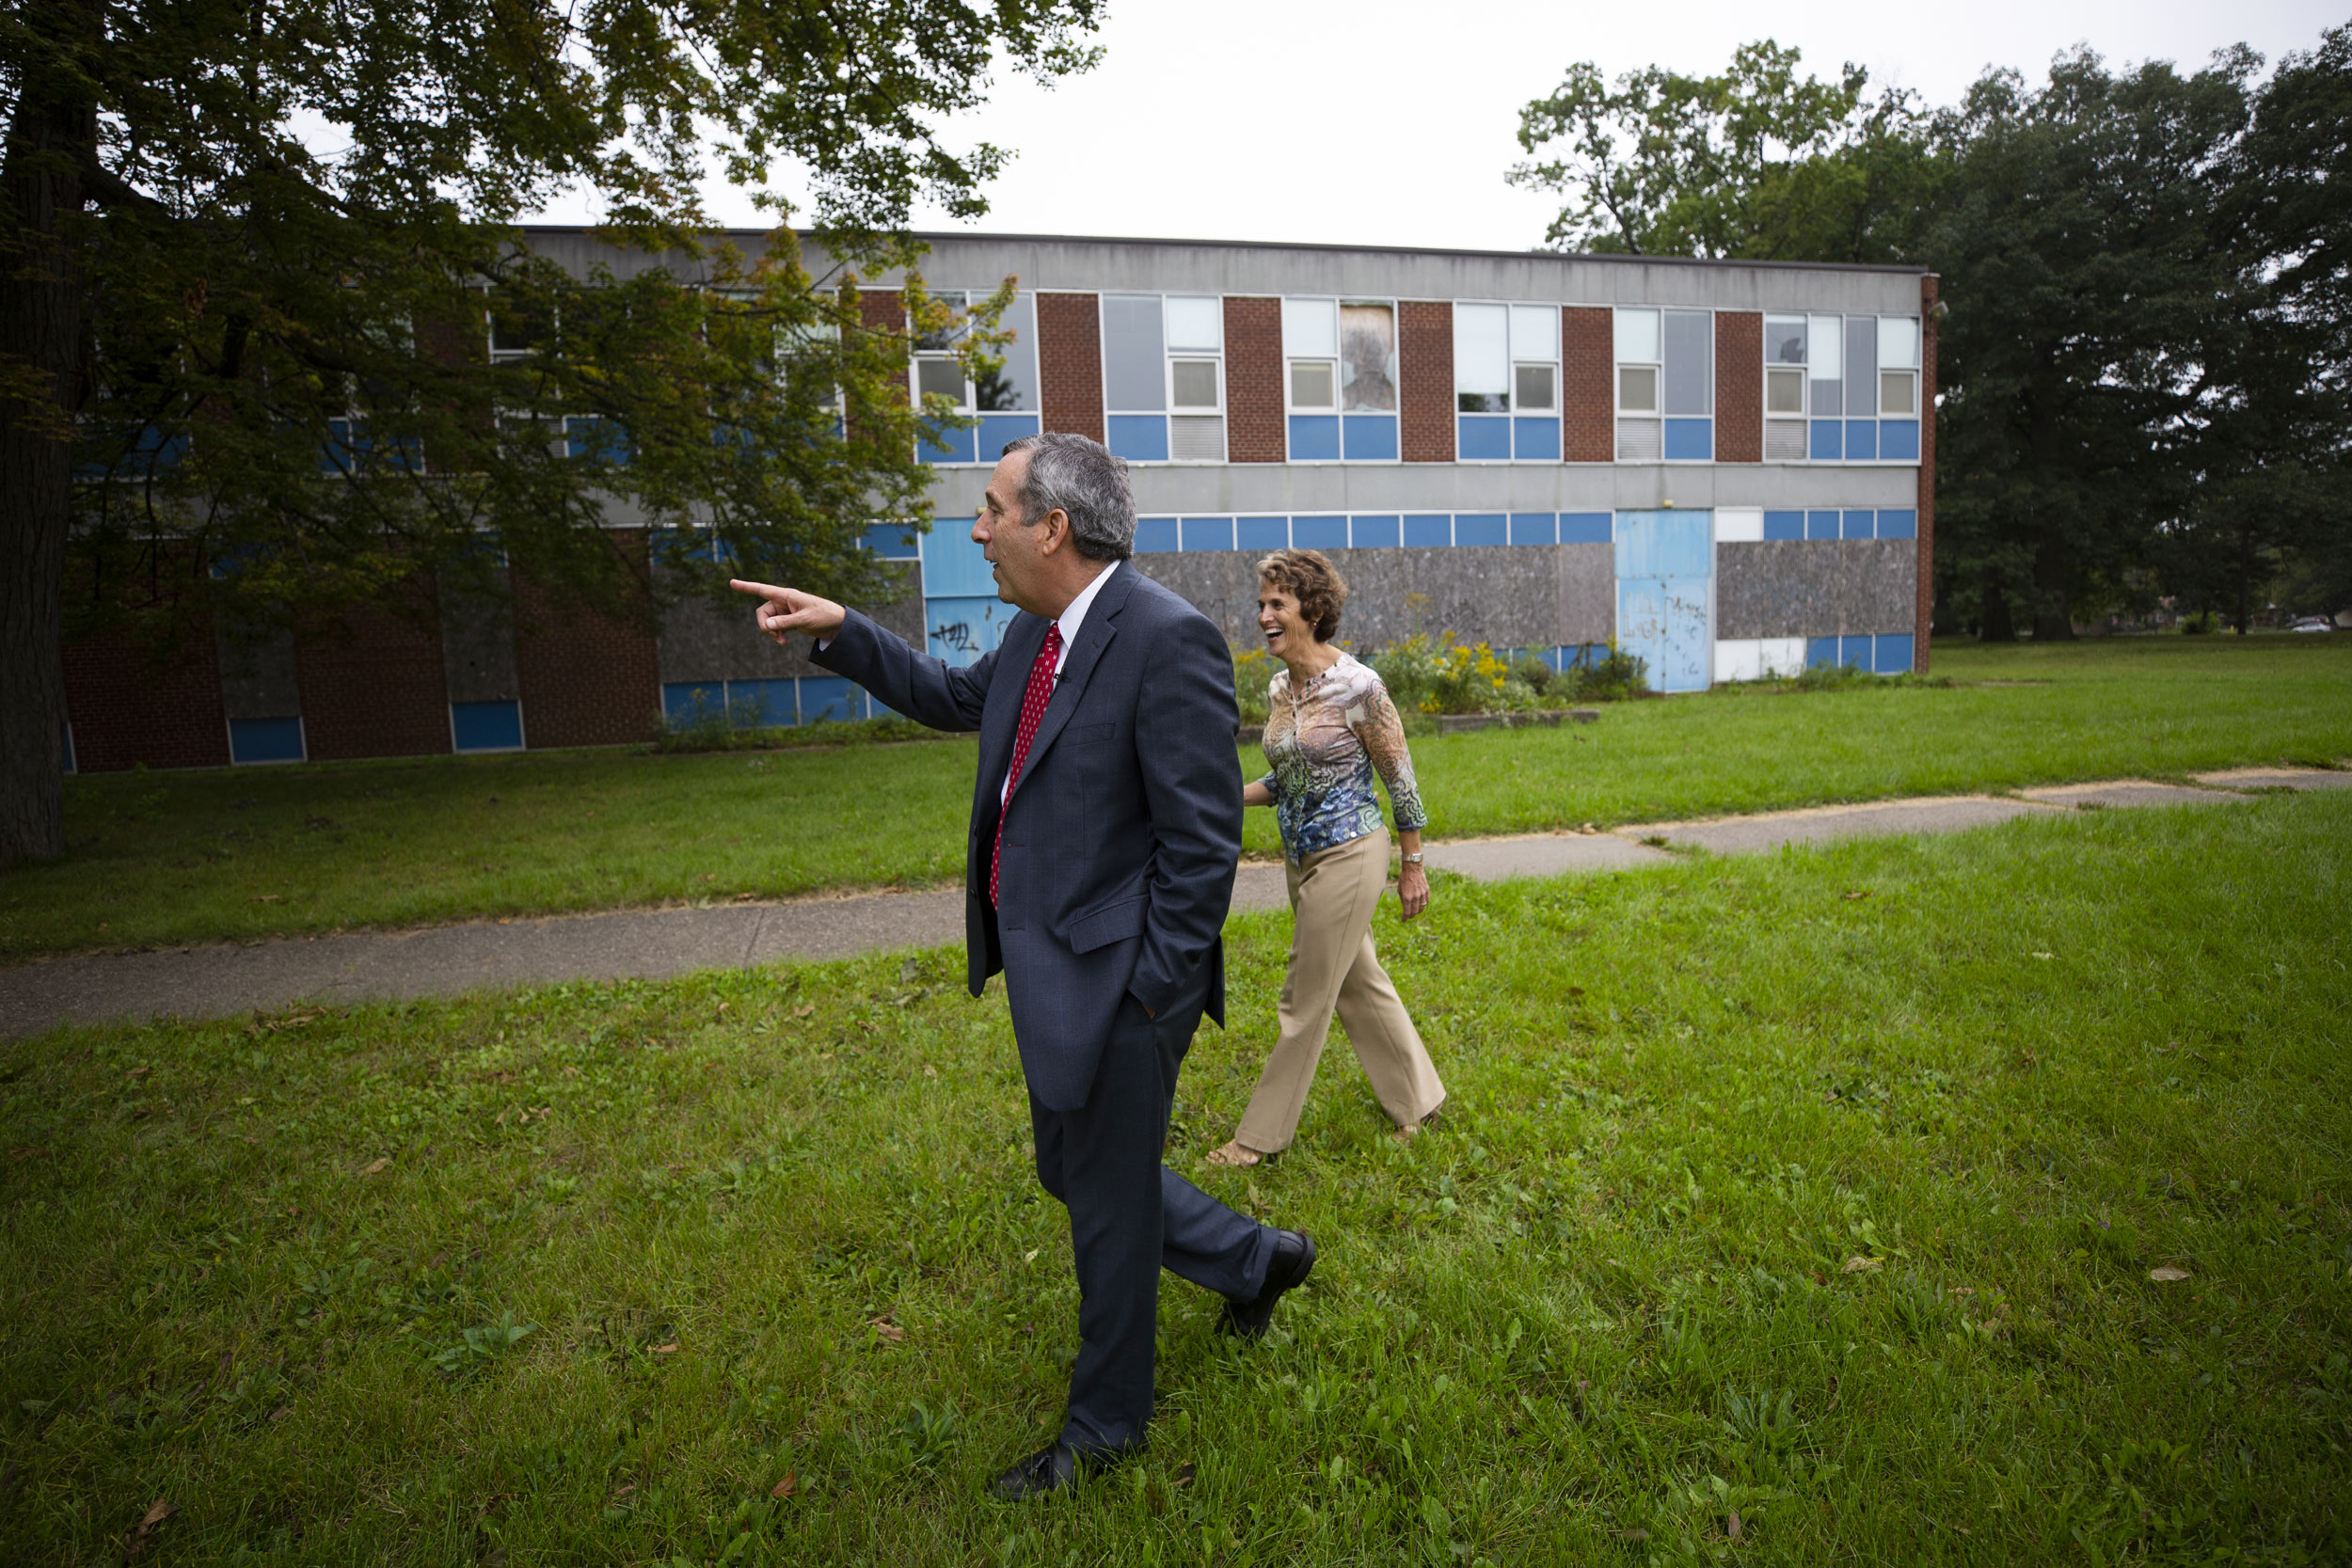 Bacow walks the grounds of one of his former schools with his wife.